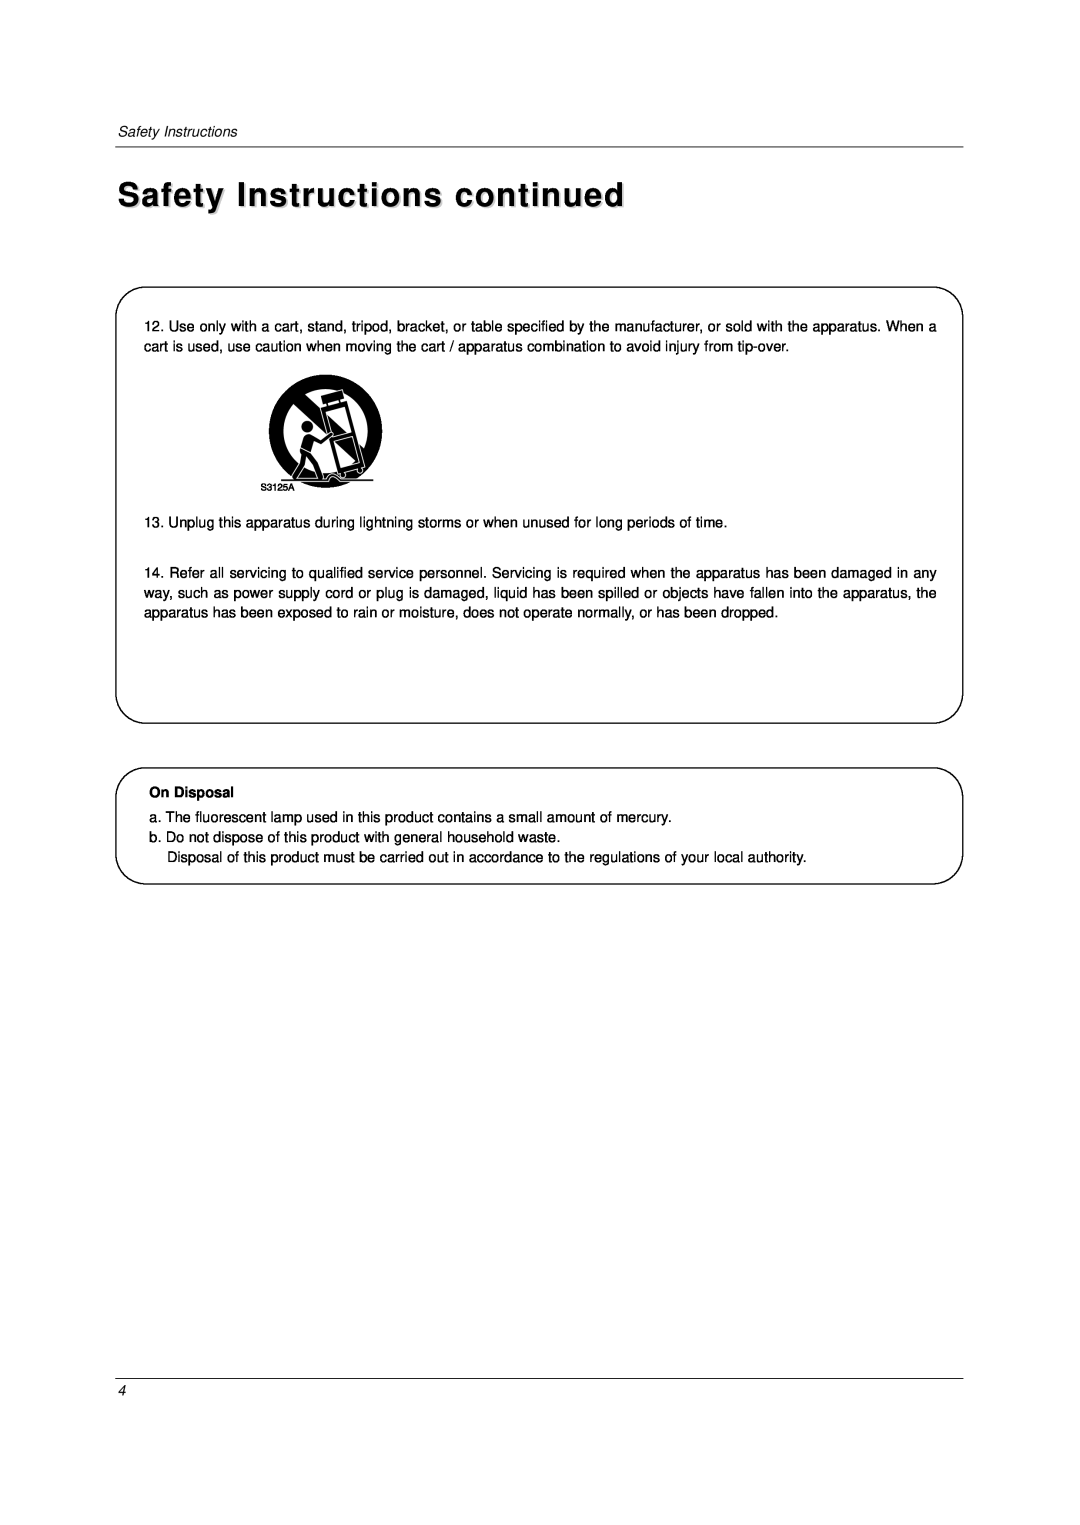 LG Electronics DU-37LZ30 owner manual Safety Instructions continued, On Disposal 